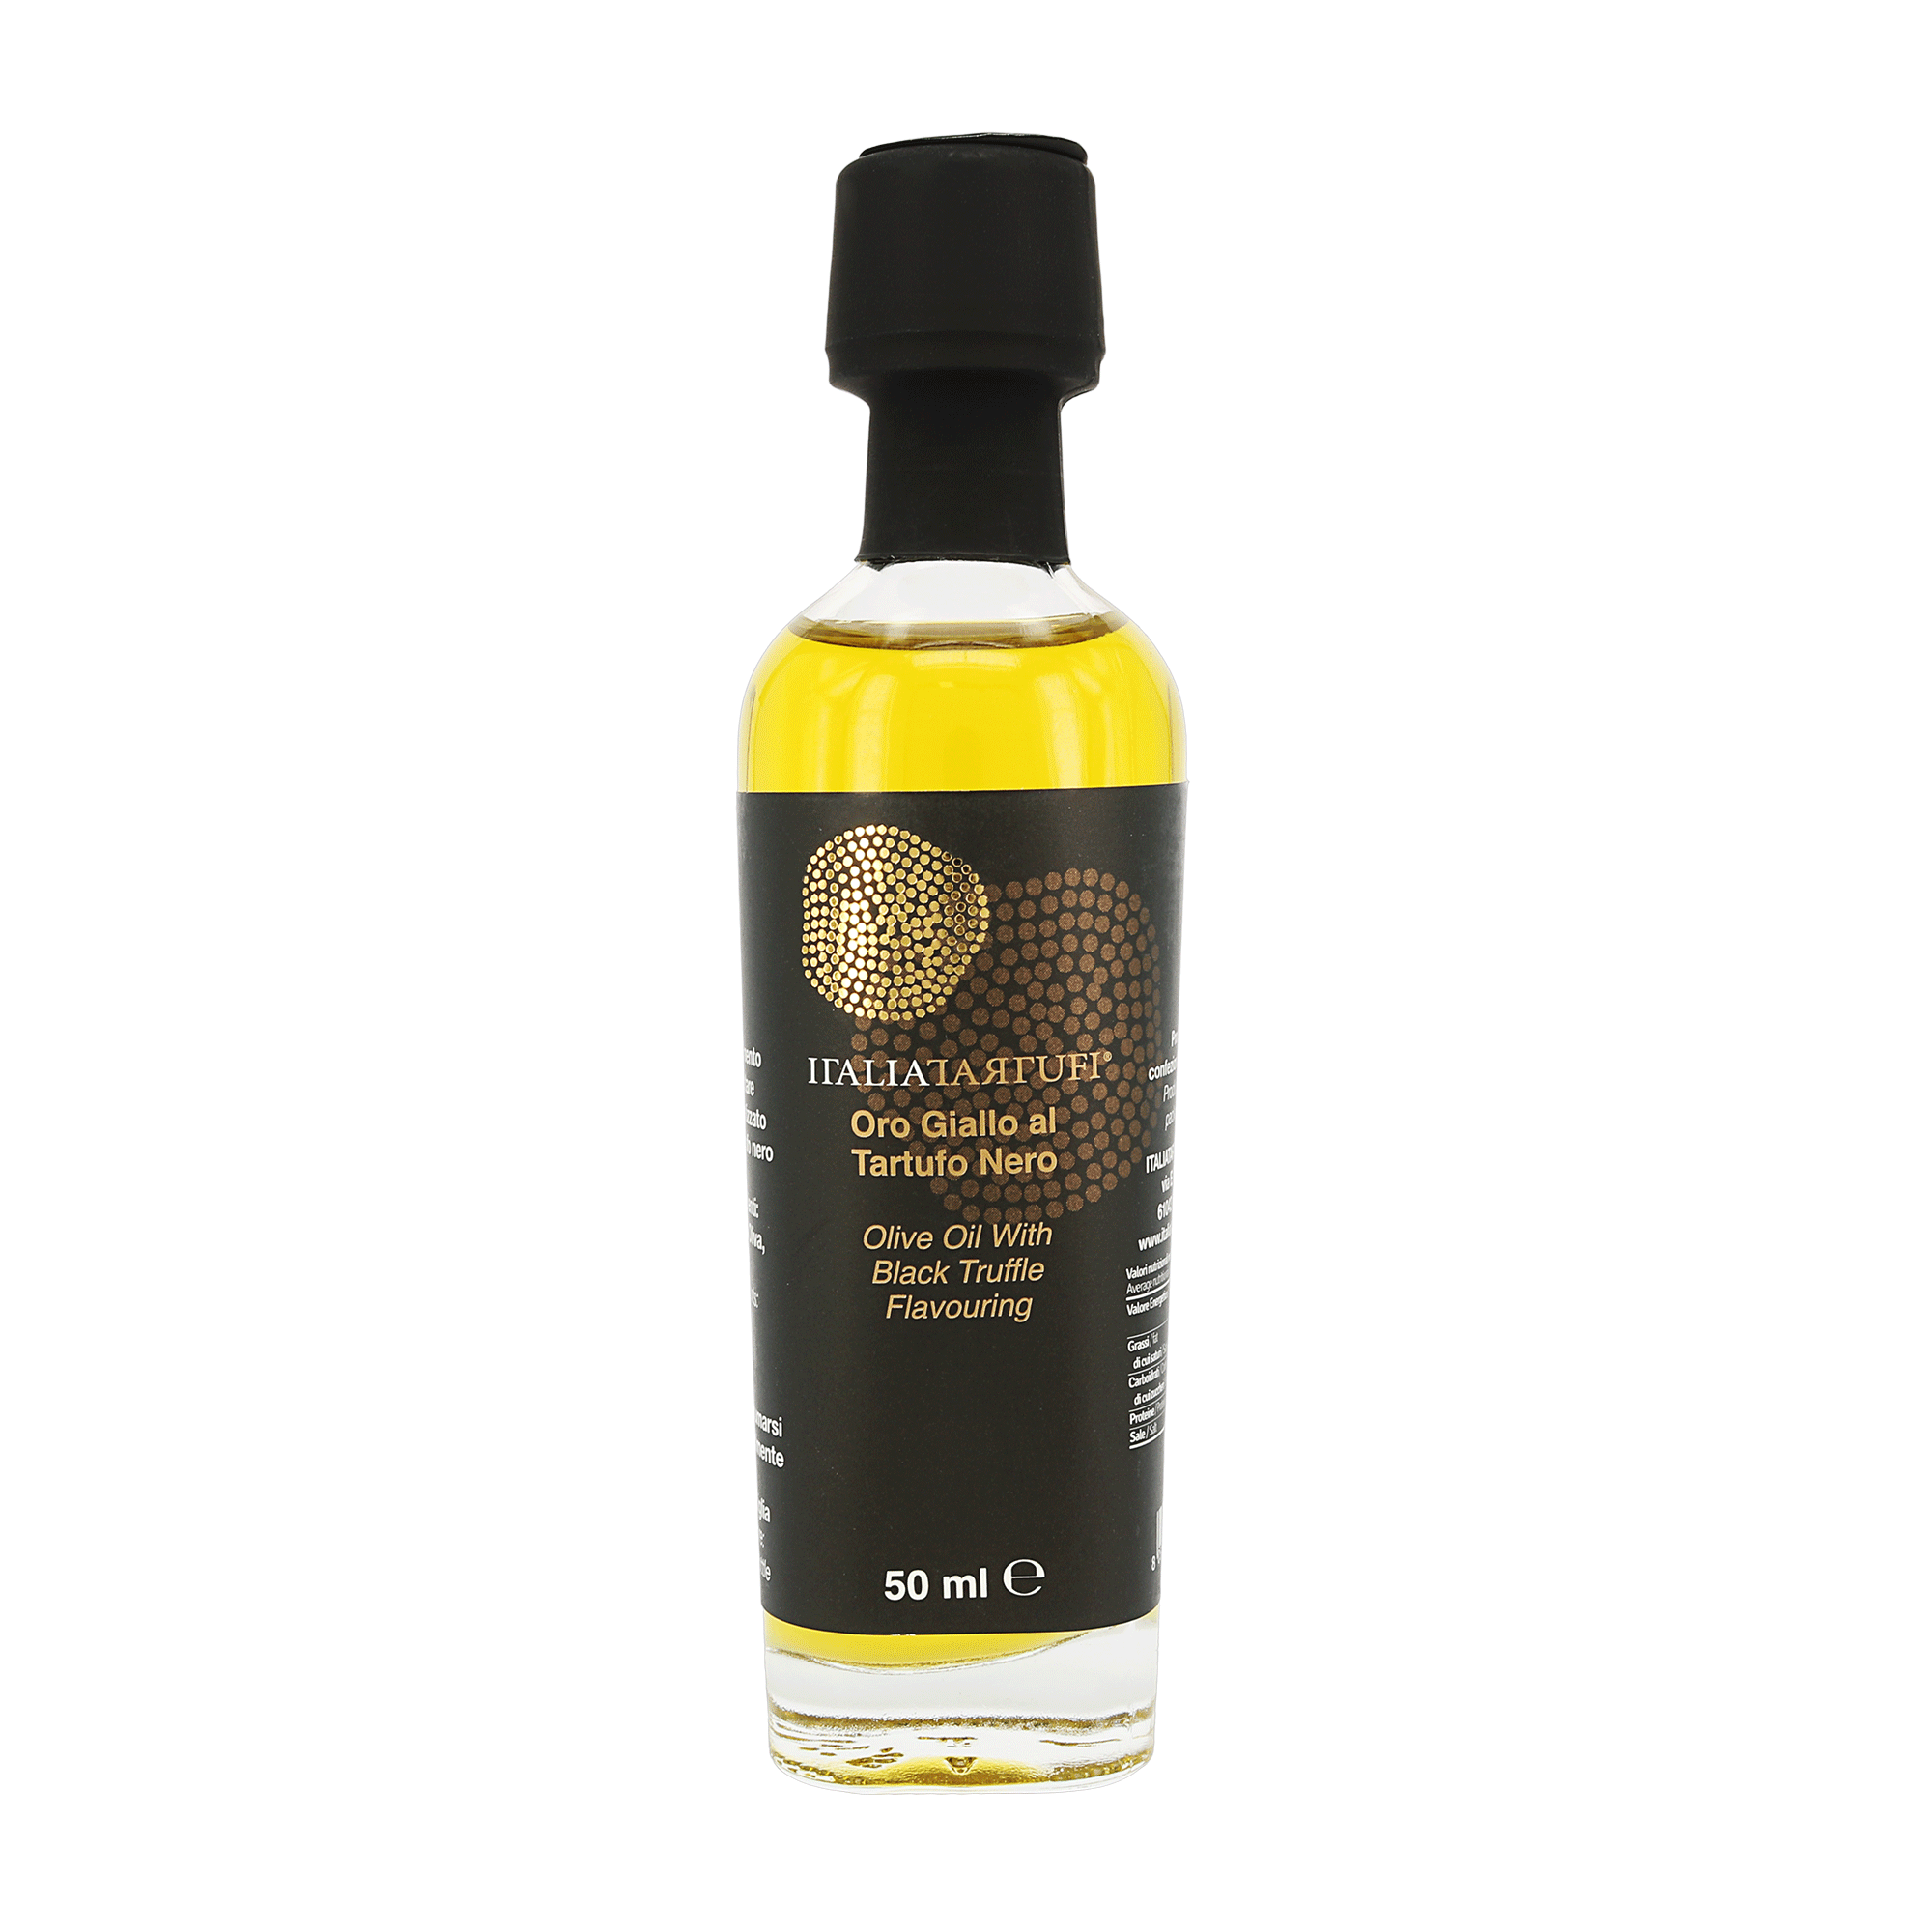 Olive Oil with Black Truffle Flavouring (50ml)  (Italy)  黑松露調味橄欖油